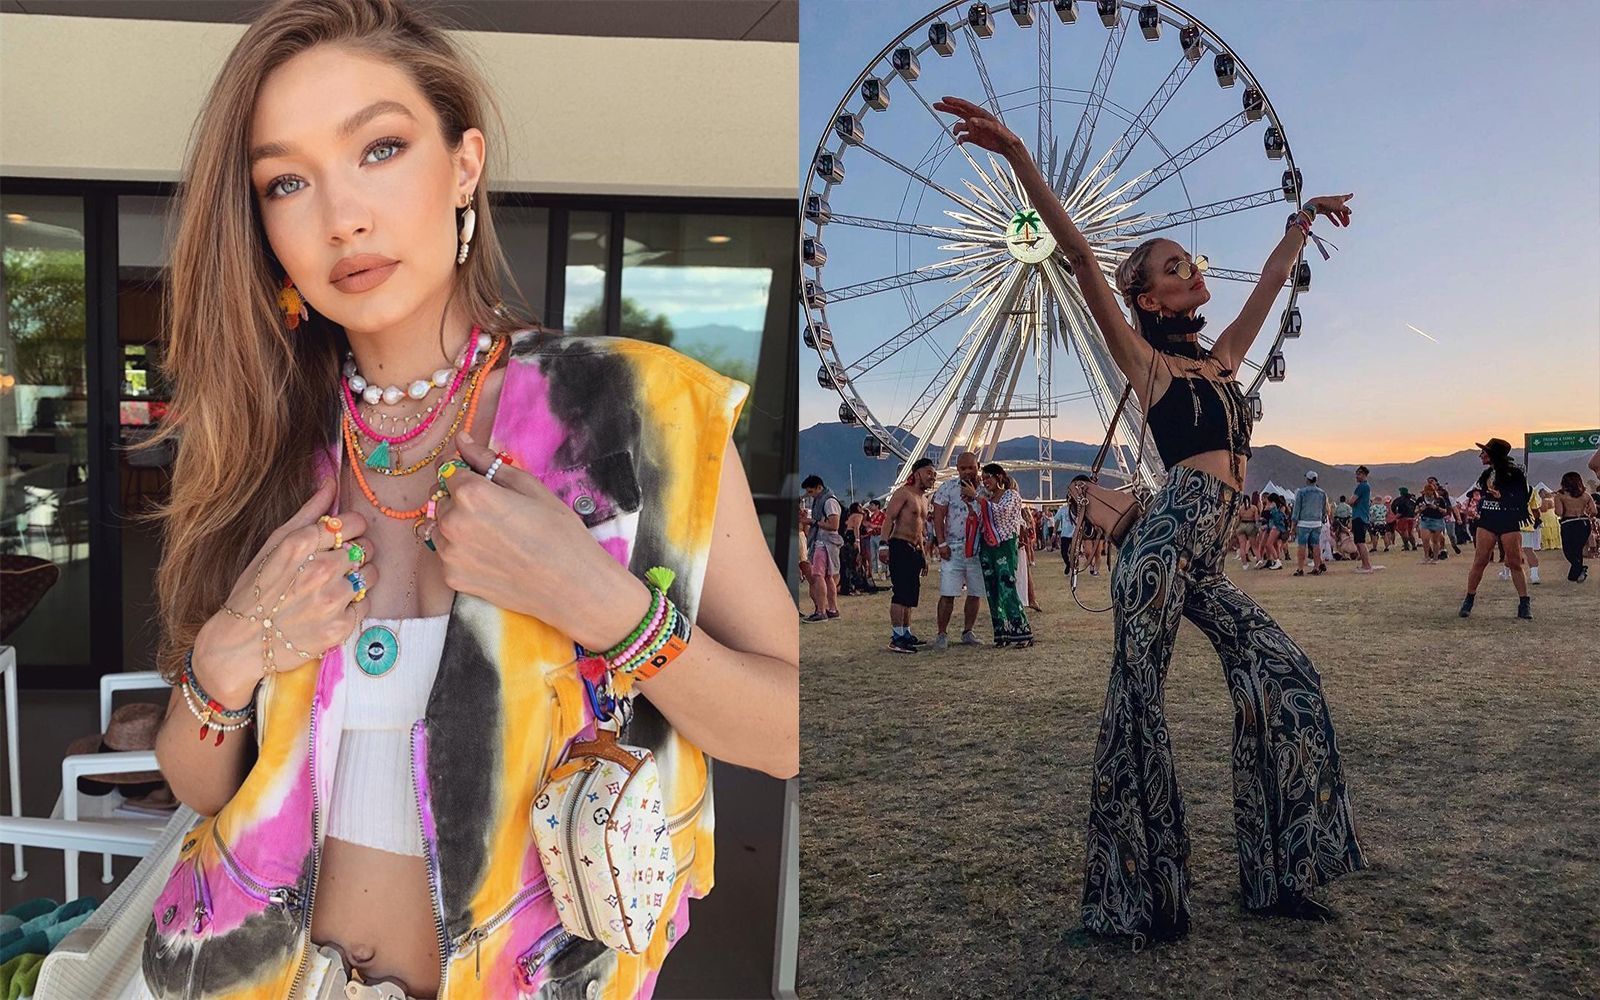 Where do the Coachella Style trends come from?